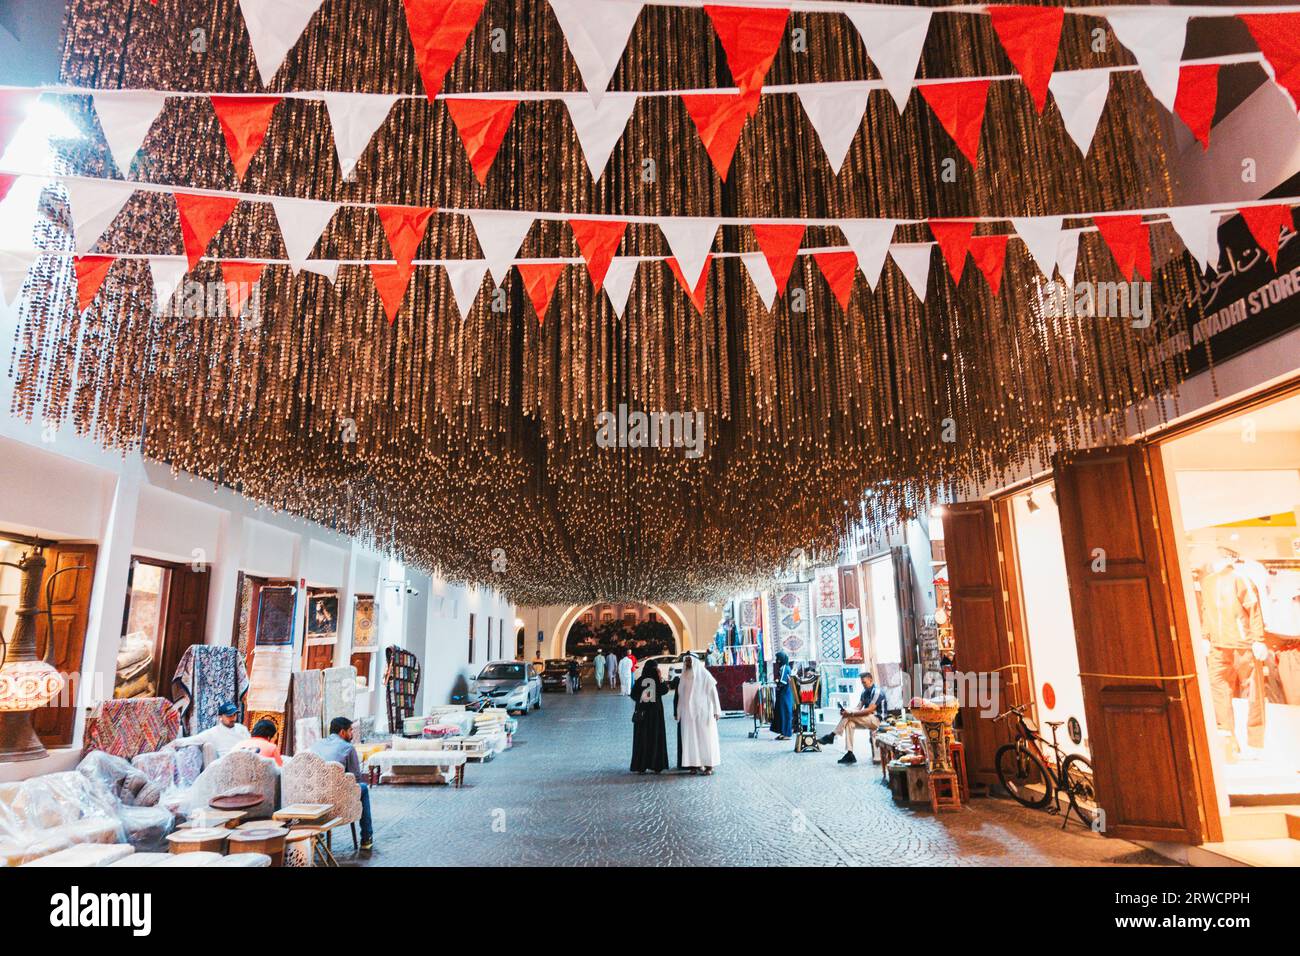 brown hanging rods form an art installation inside the Manama Souq, Bahrain. Red and white flags represent the national colors Stock Photo